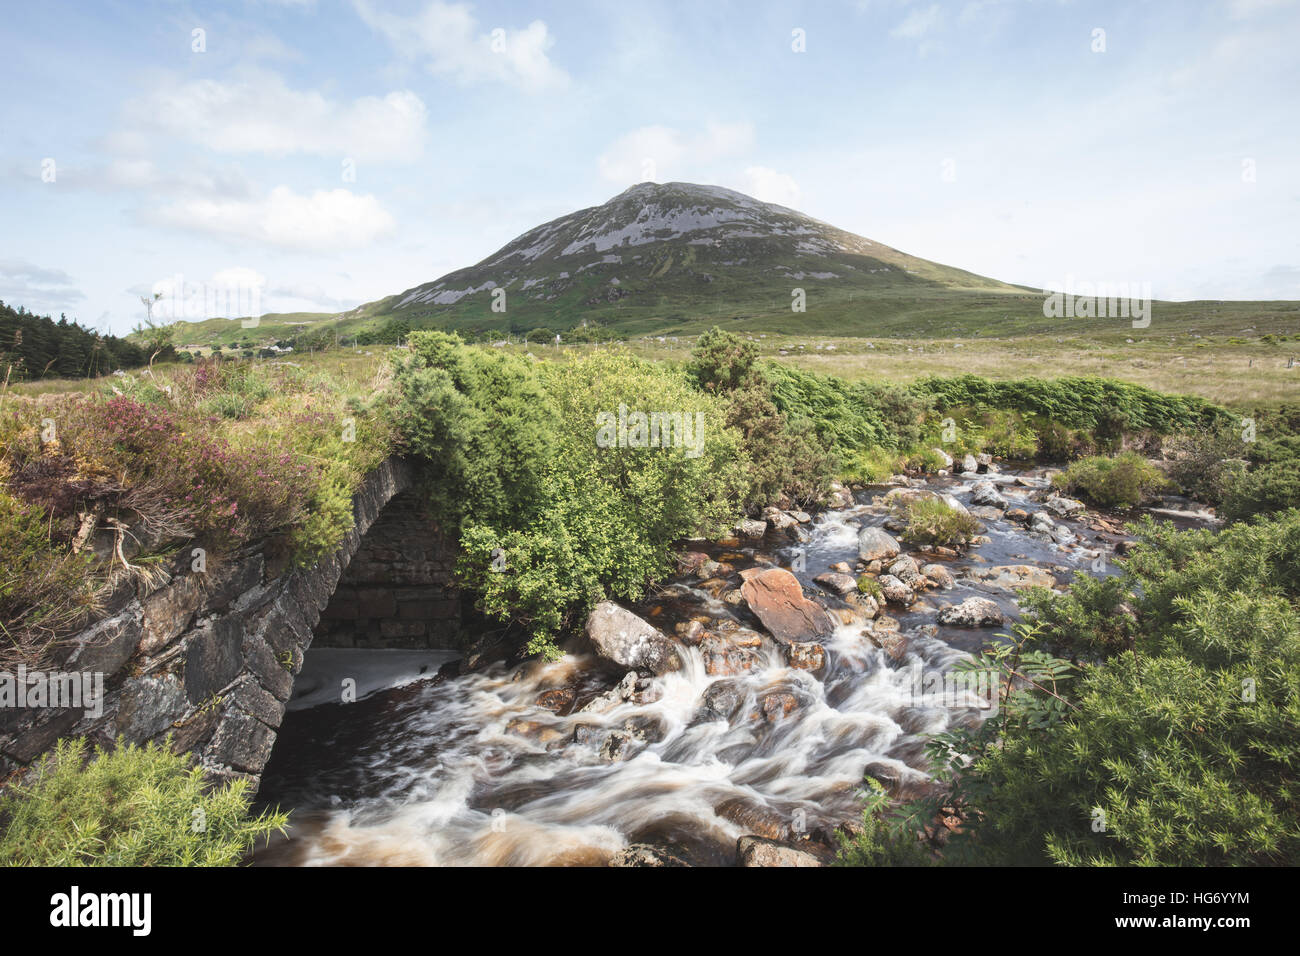 View of Mount Errigal from an old bridge in the poisoned Glen. Glenveagh national park, County Donegal, Ireland. Stock Photo